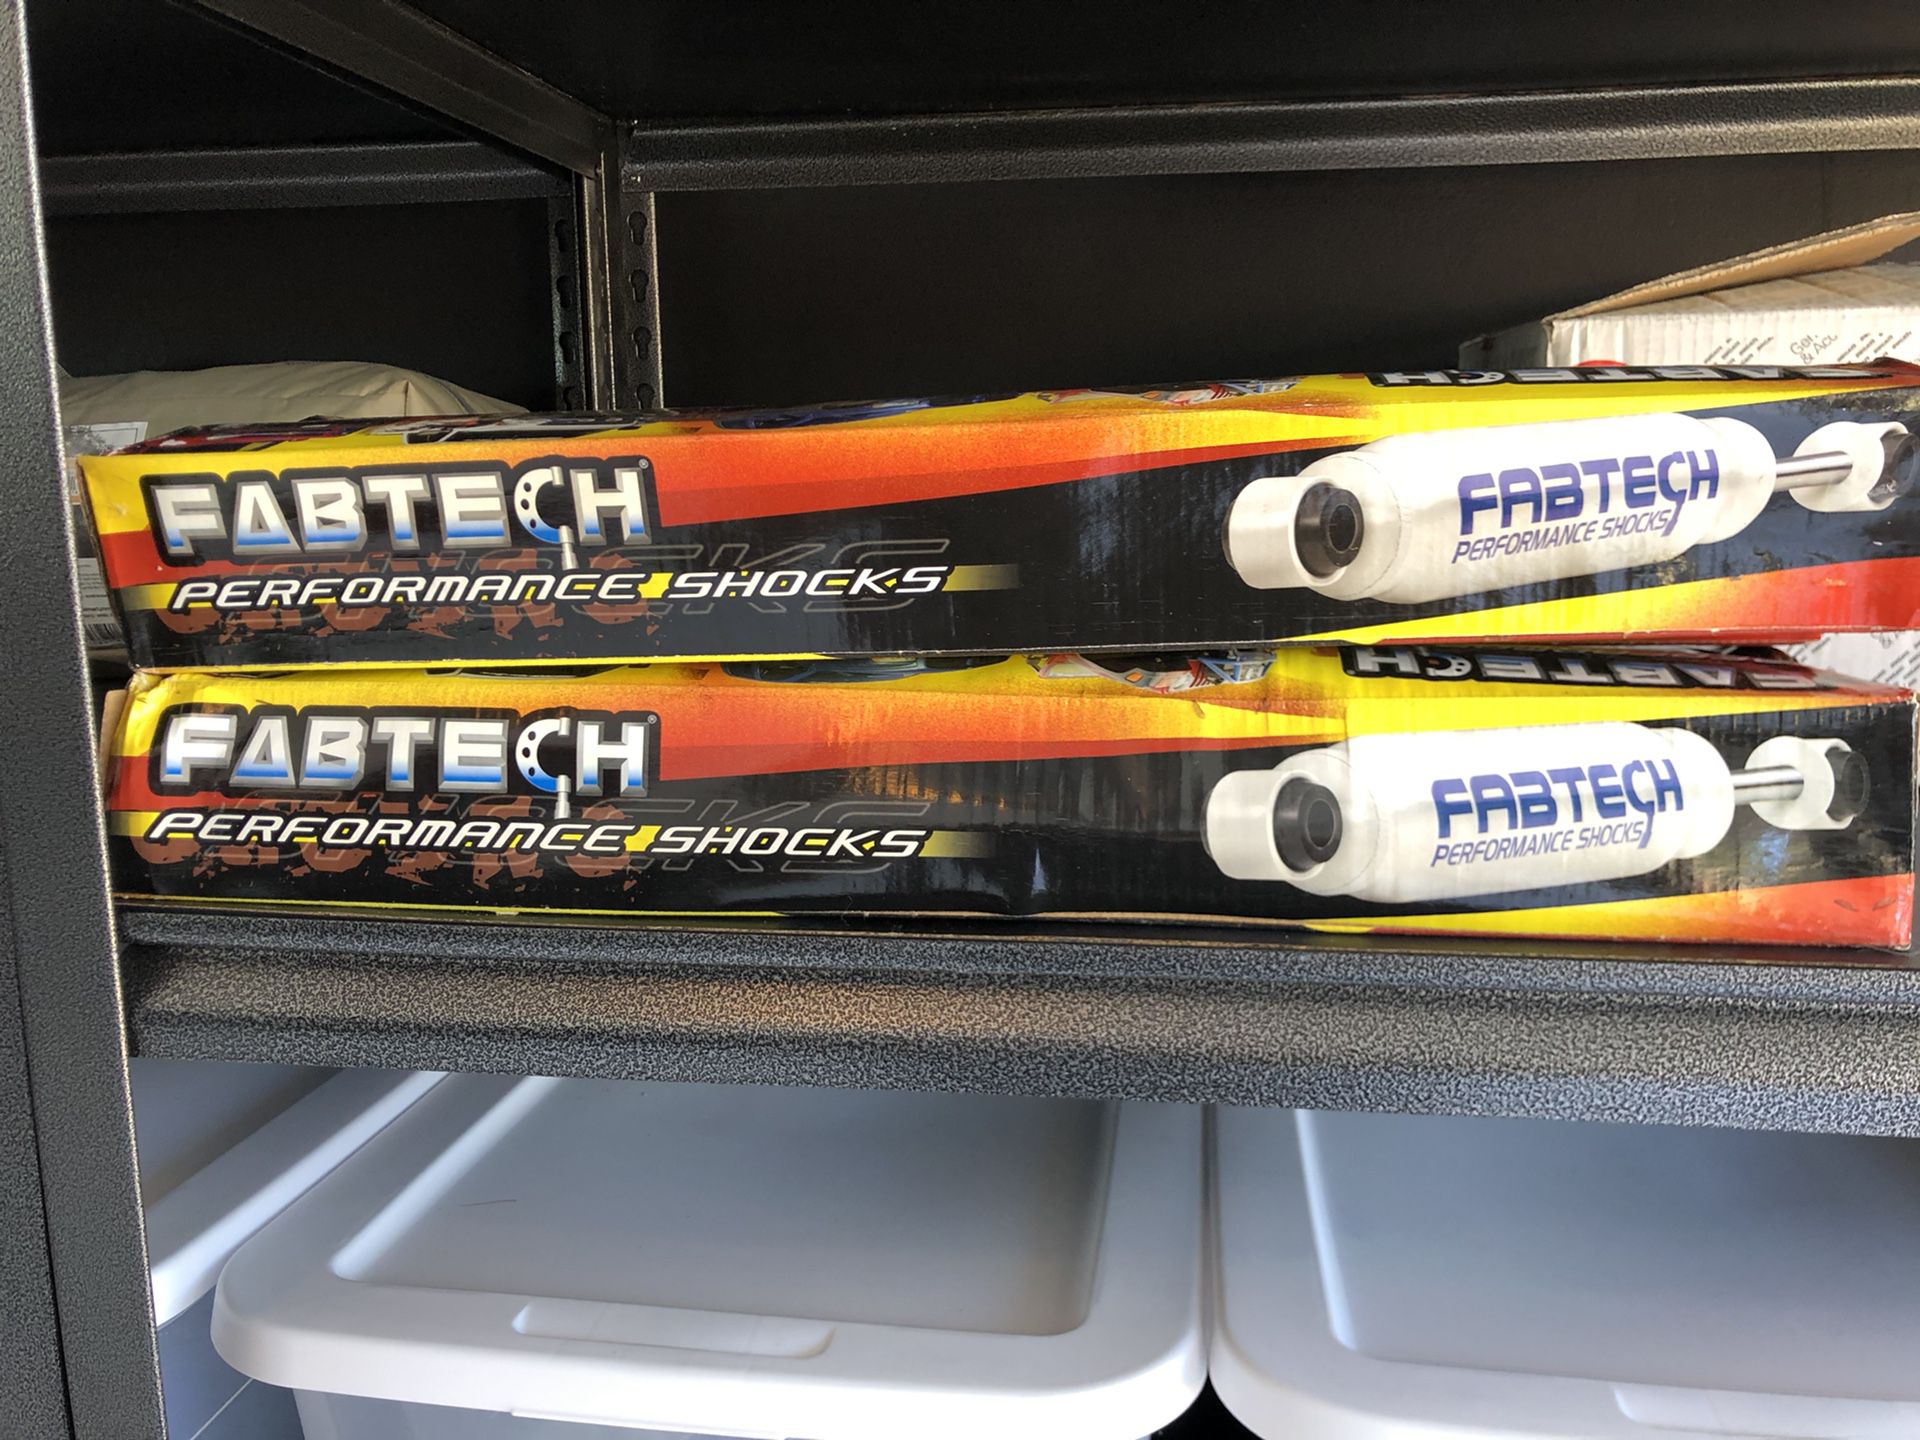 Fabtech front and rear performance shock